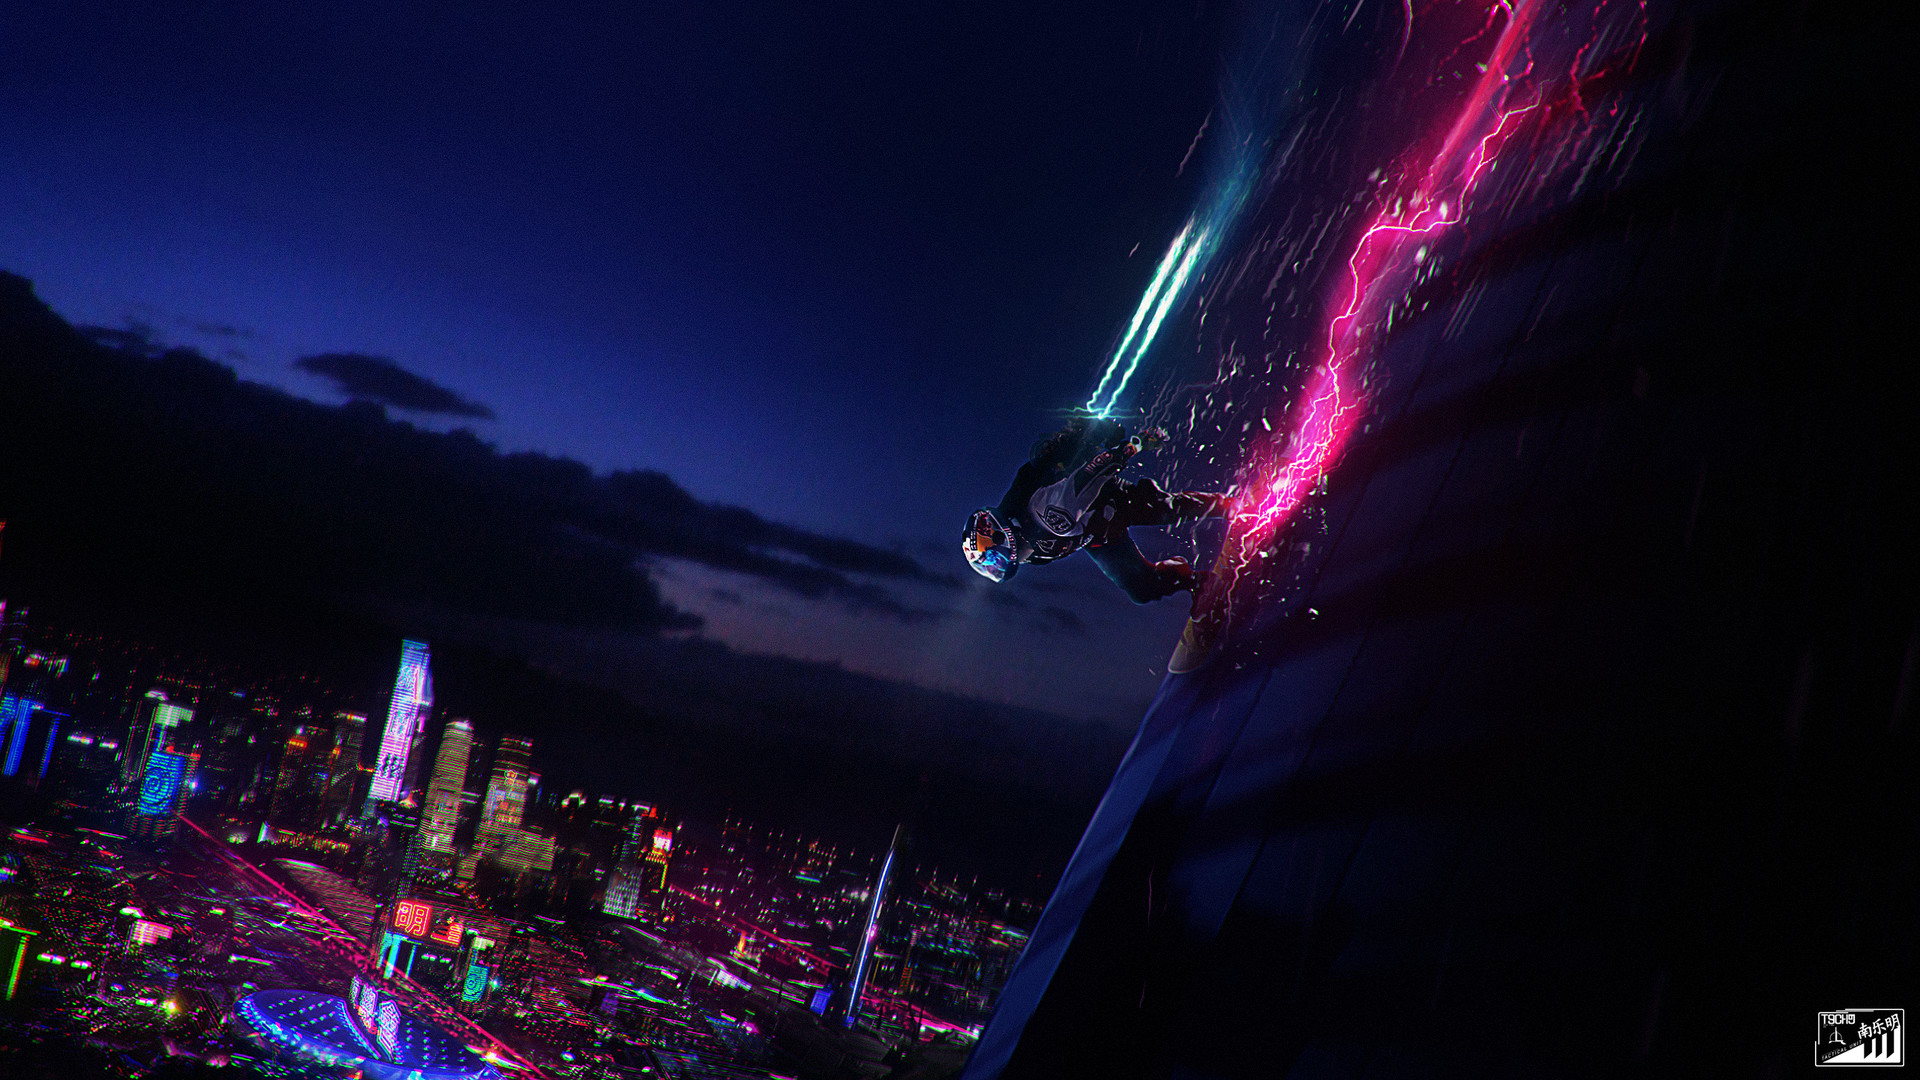 Electric Rider by Jonathan Lucero